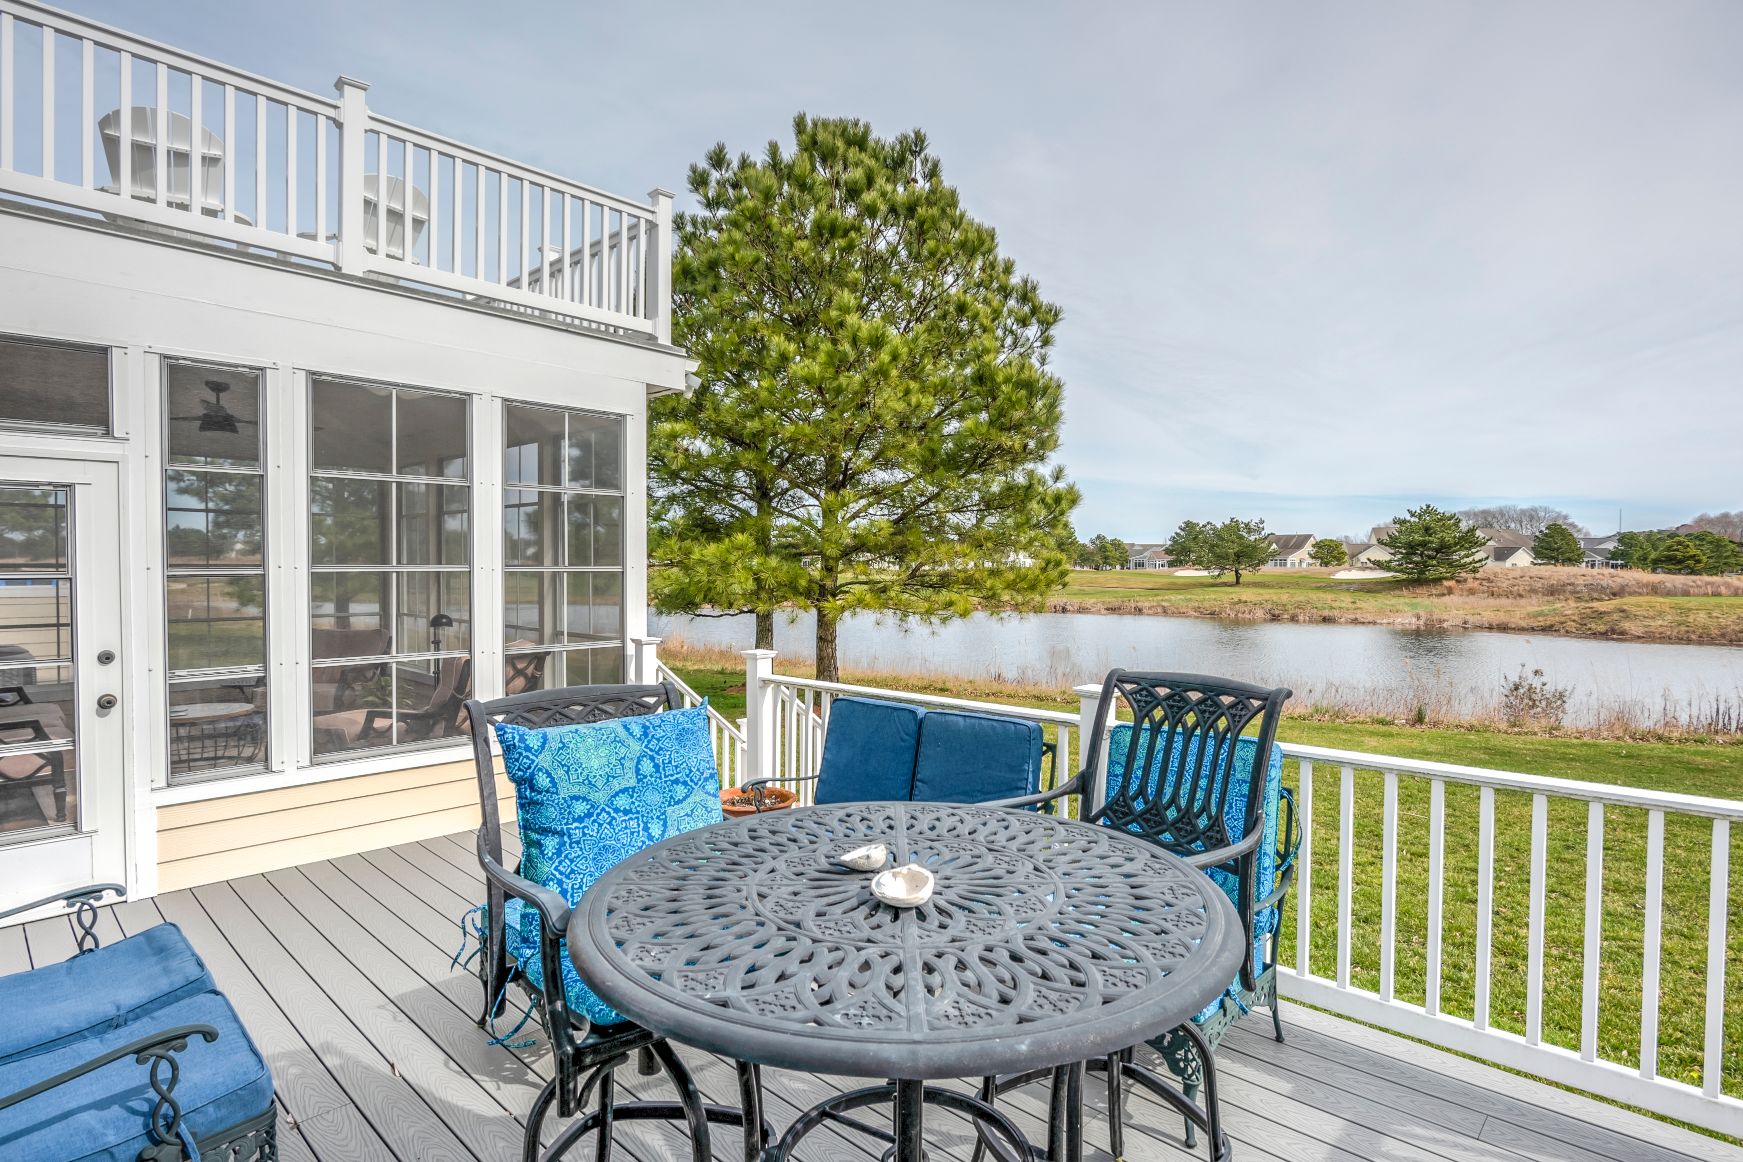 October Glory Exterior in Ocean View DE - Lower Deck with Vintage Metal Round Table